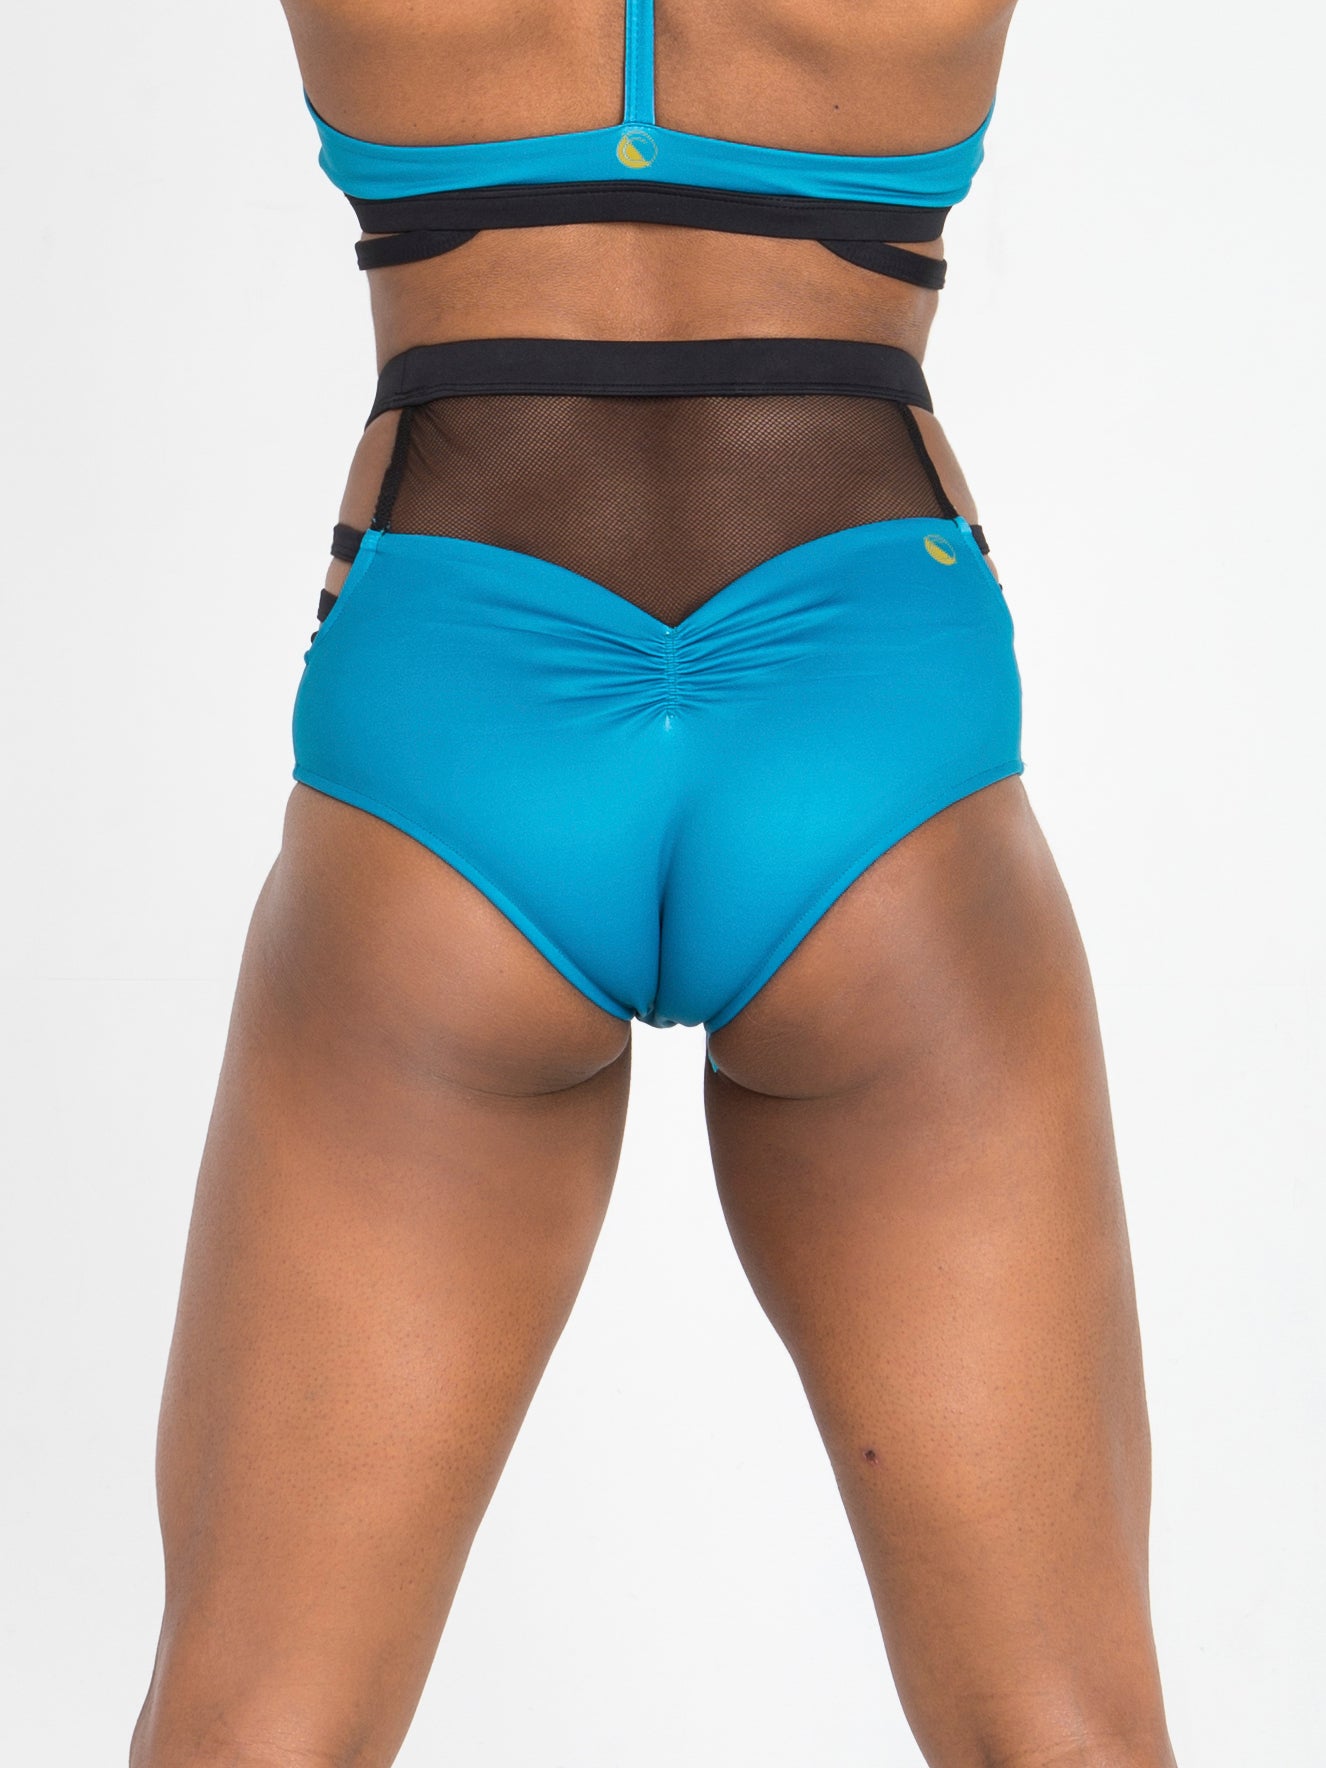 Ride Shorts in Teal